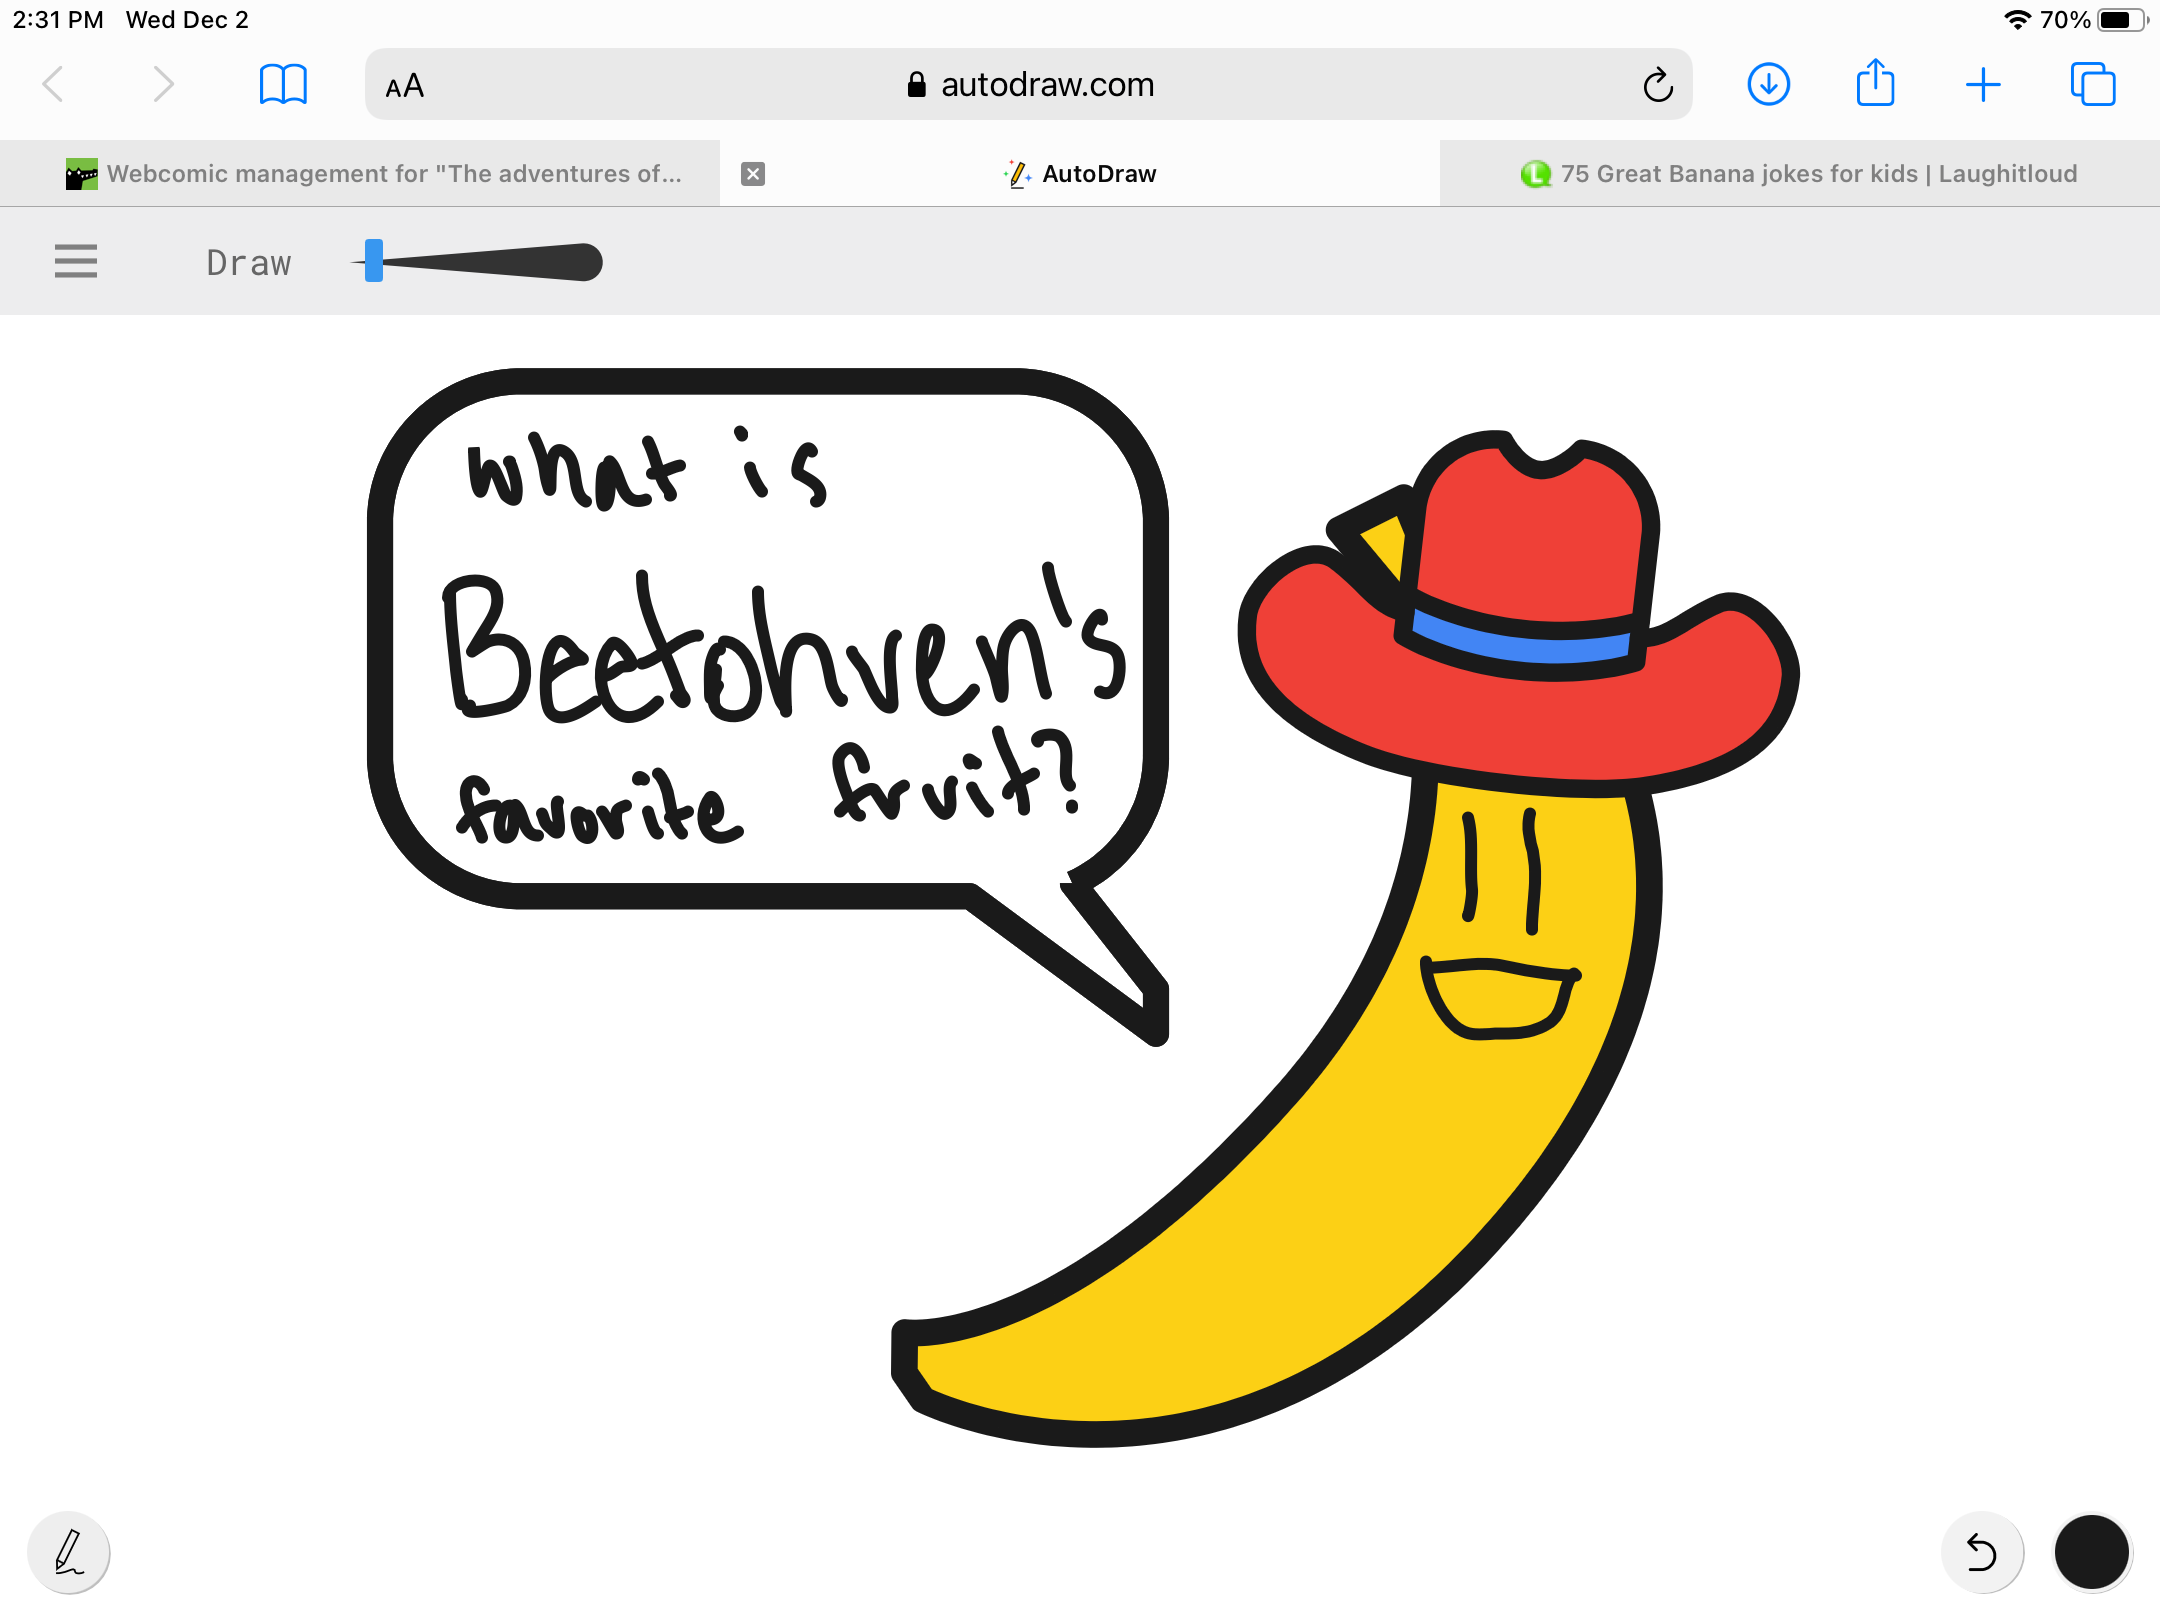 Beethoven - Unchaptered | The adventures of Mr. Banana